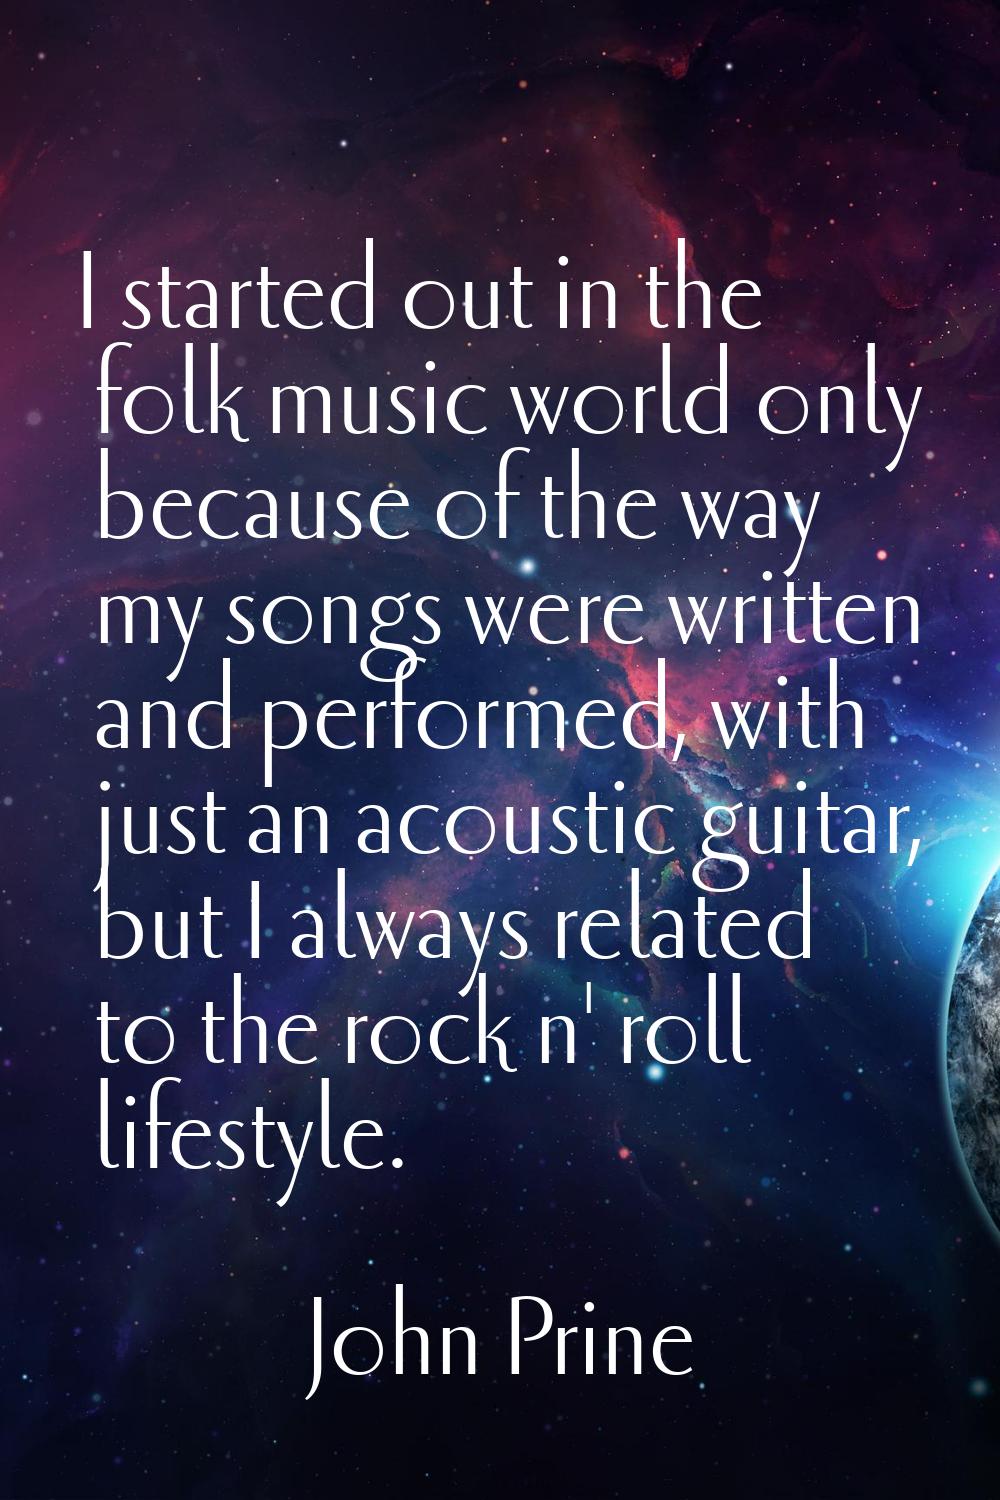 I started out in the folk music world only because of the way my songs were written and performed, 